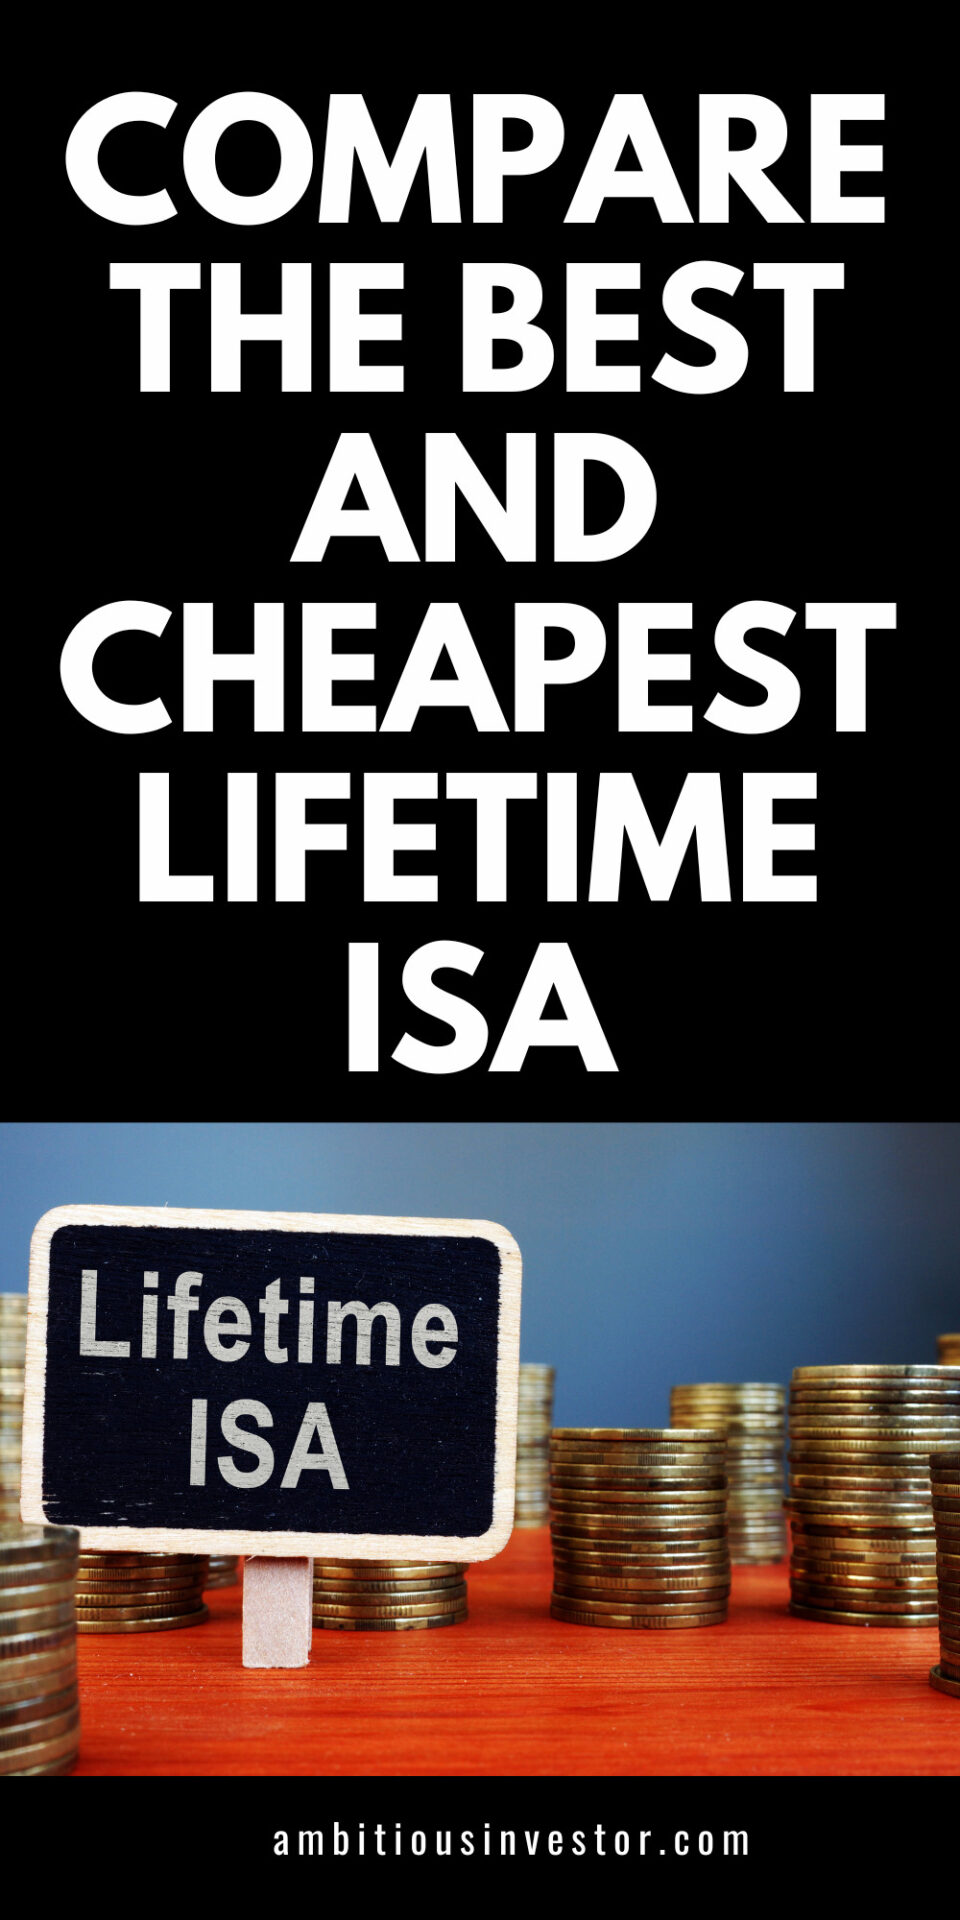 Compare the Best and Cheapest Lifetime ISA 